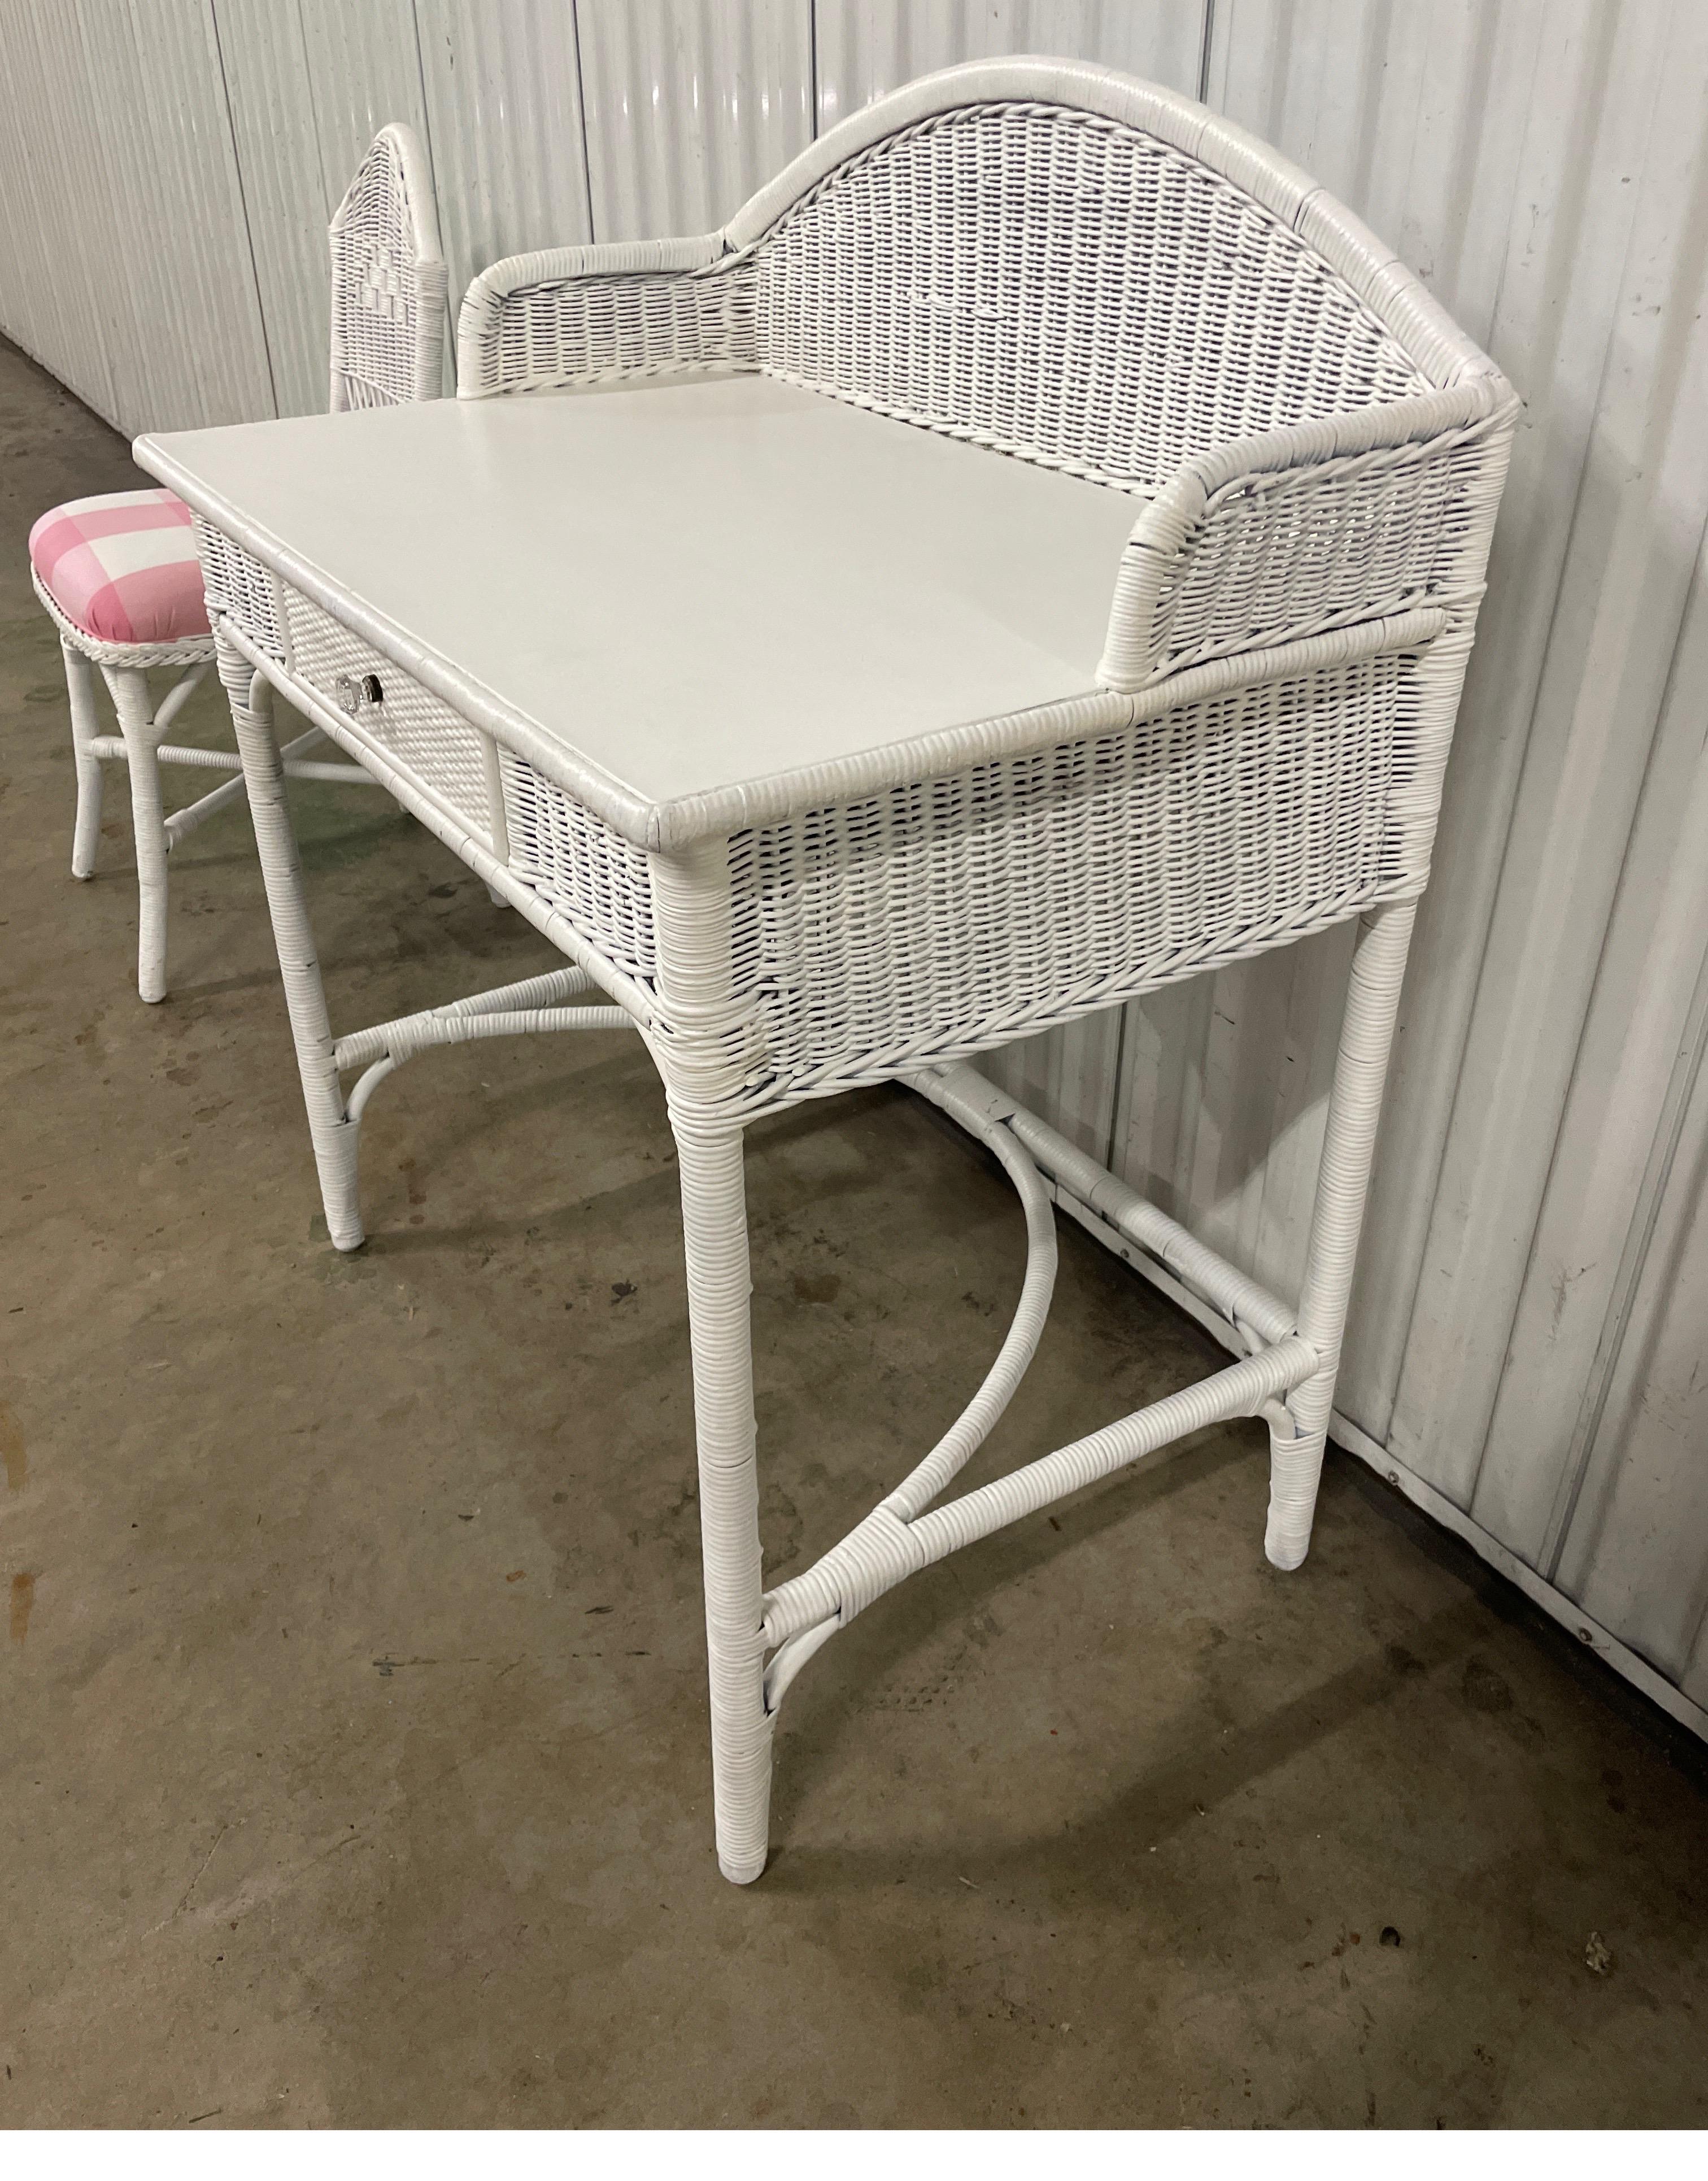 Antique White Wicker Dressing Table / Desk & Chair Set In Good Condition For Sale In West Palm Beach, FL